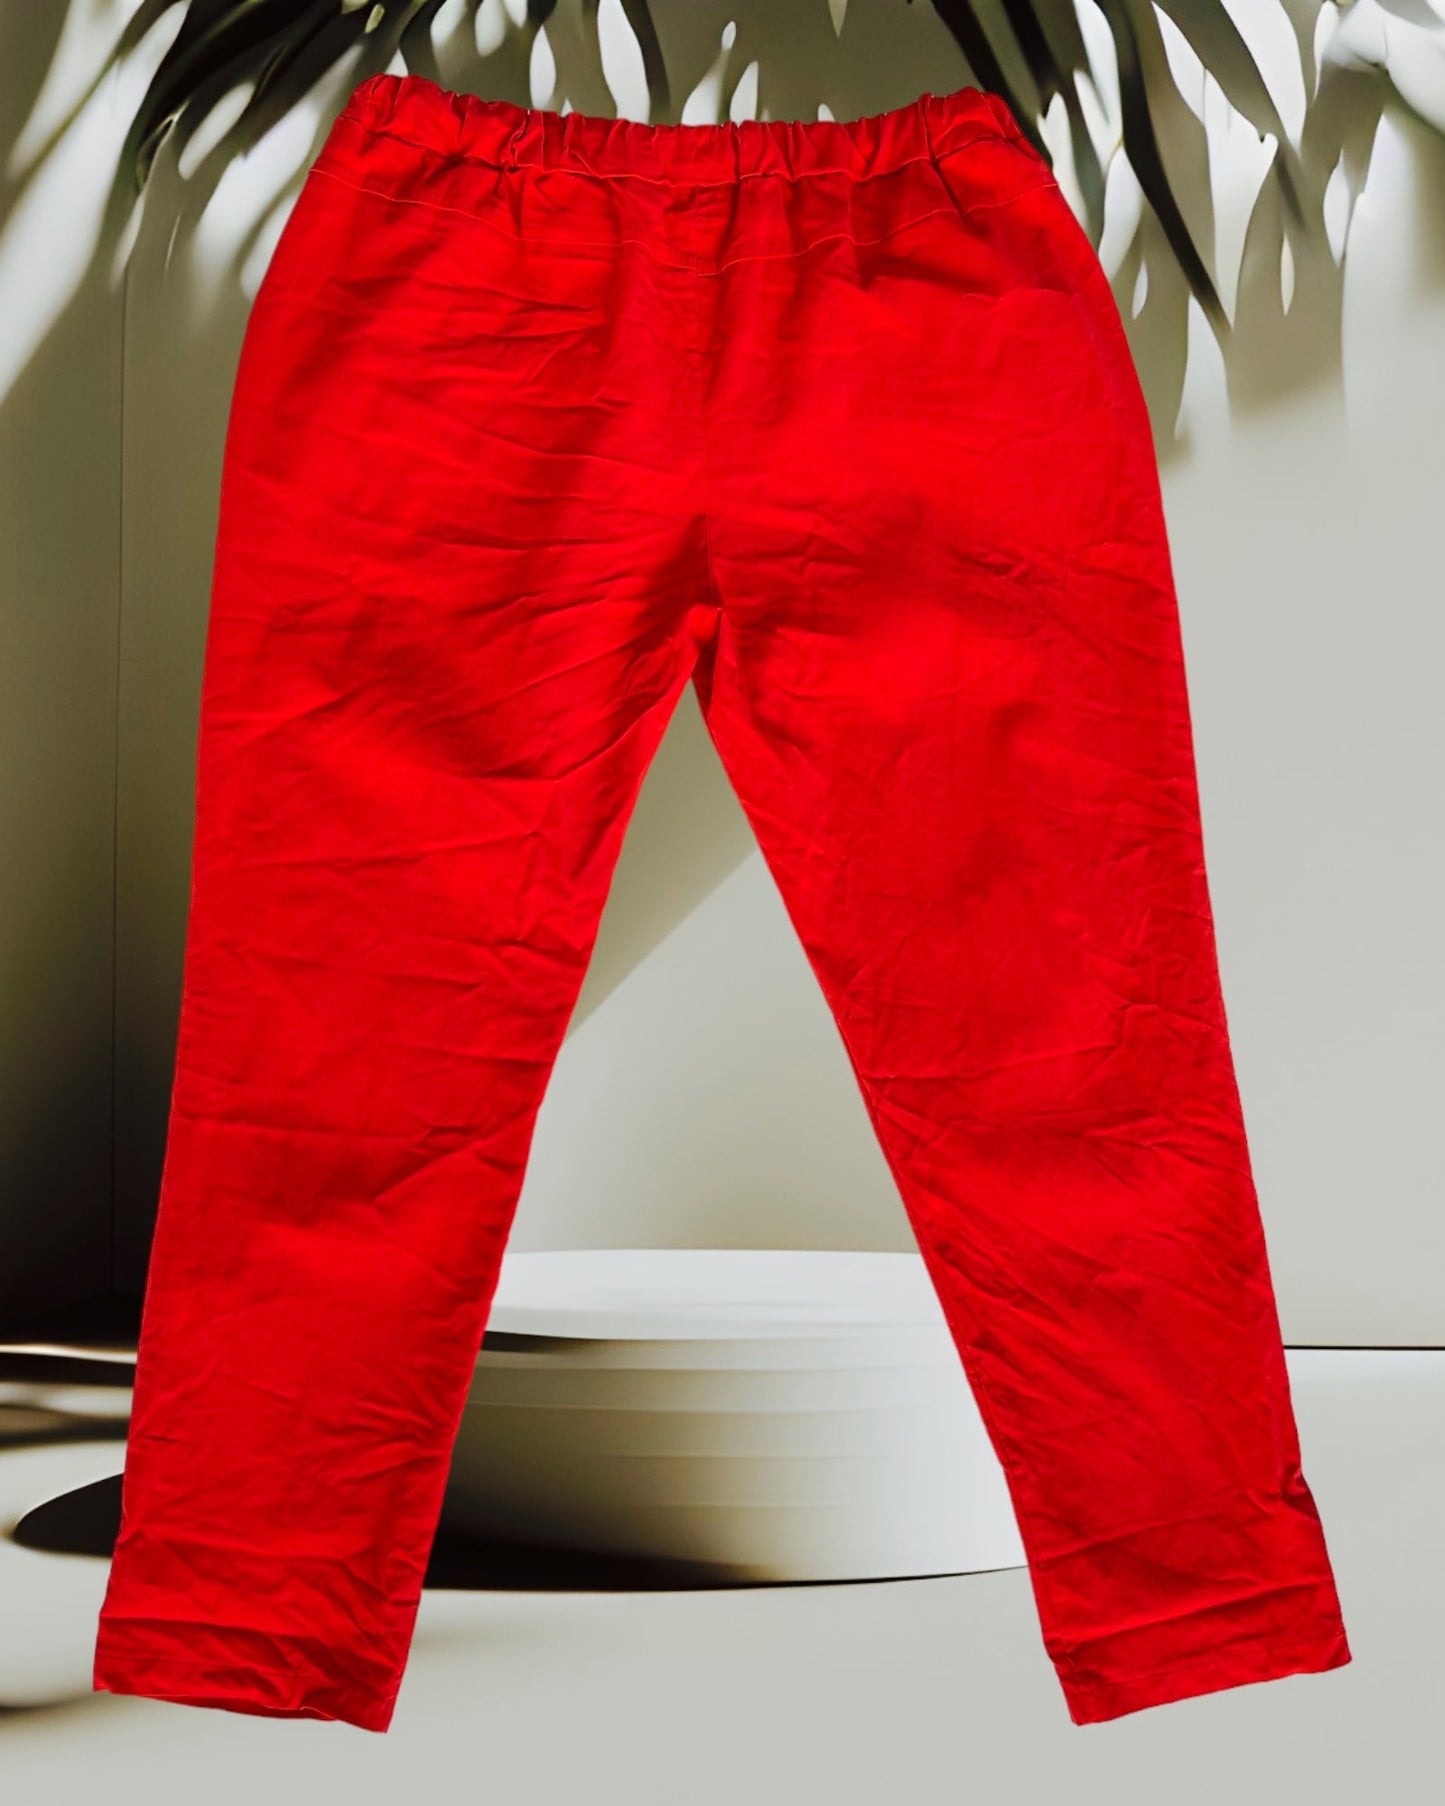 FRED - PANTALON SPORTSWEAR MAGIQUE ROUGE TAILLE 46 A 52